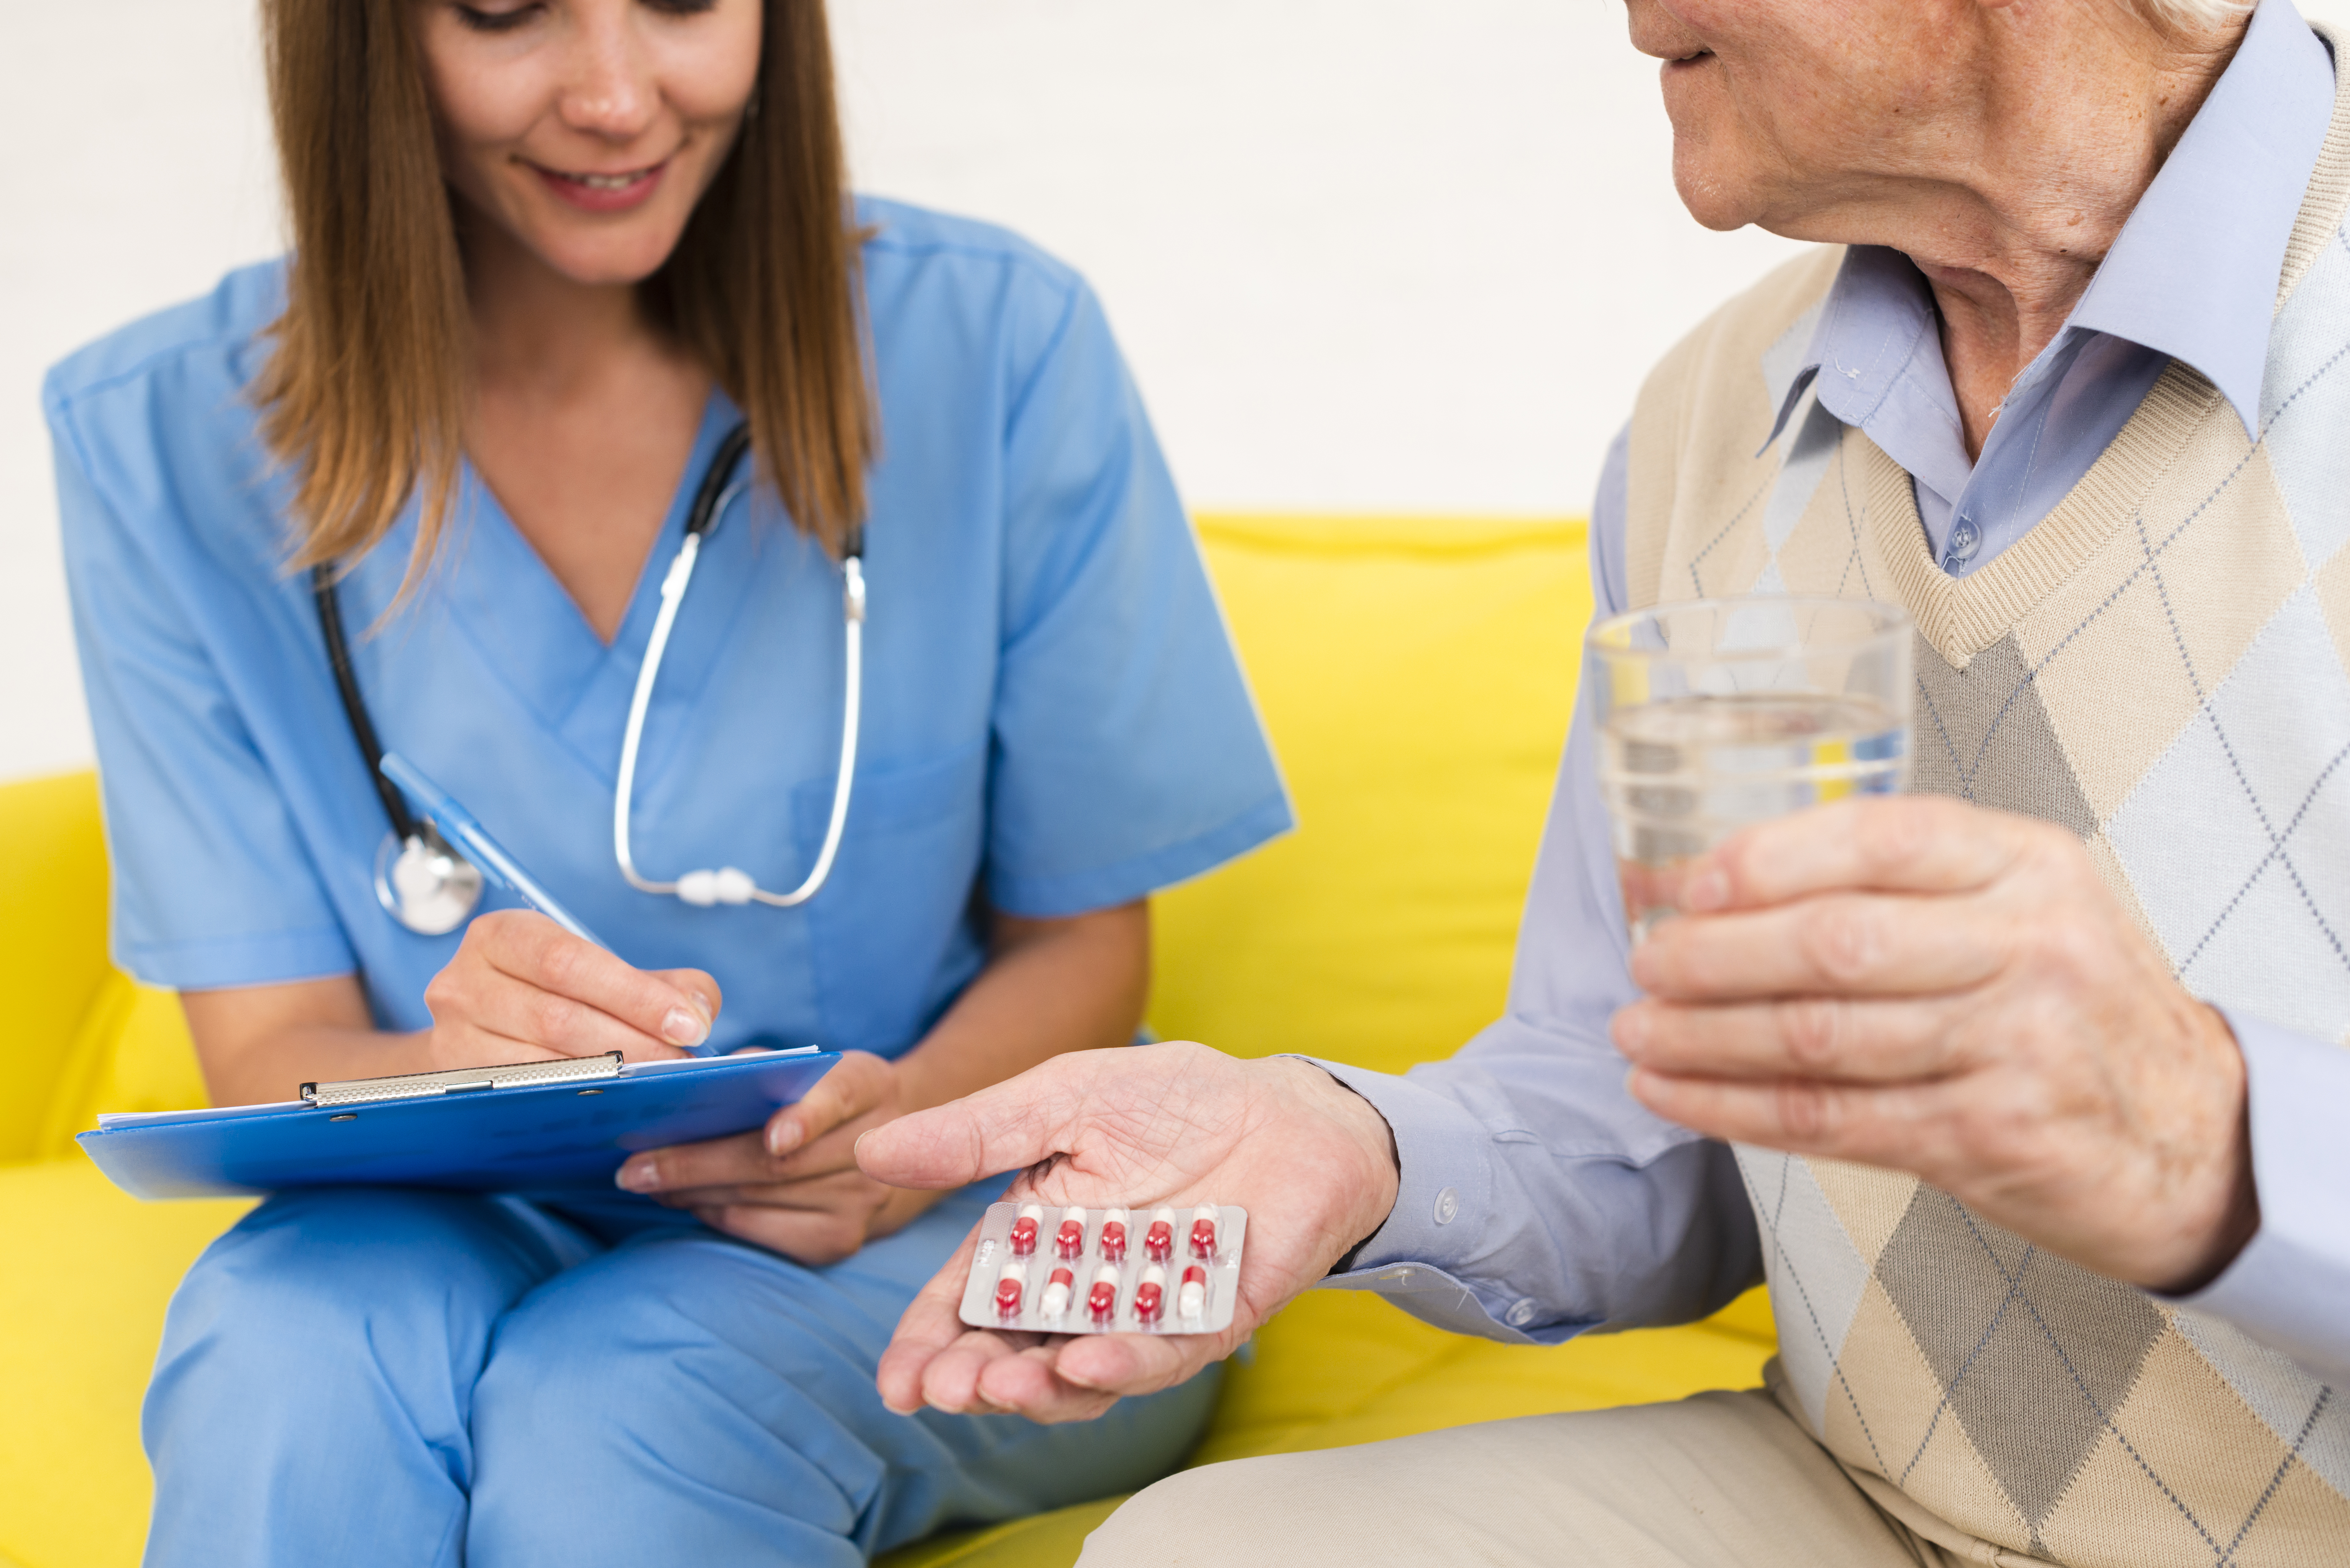 A long-term care patient receives his medication from a provider